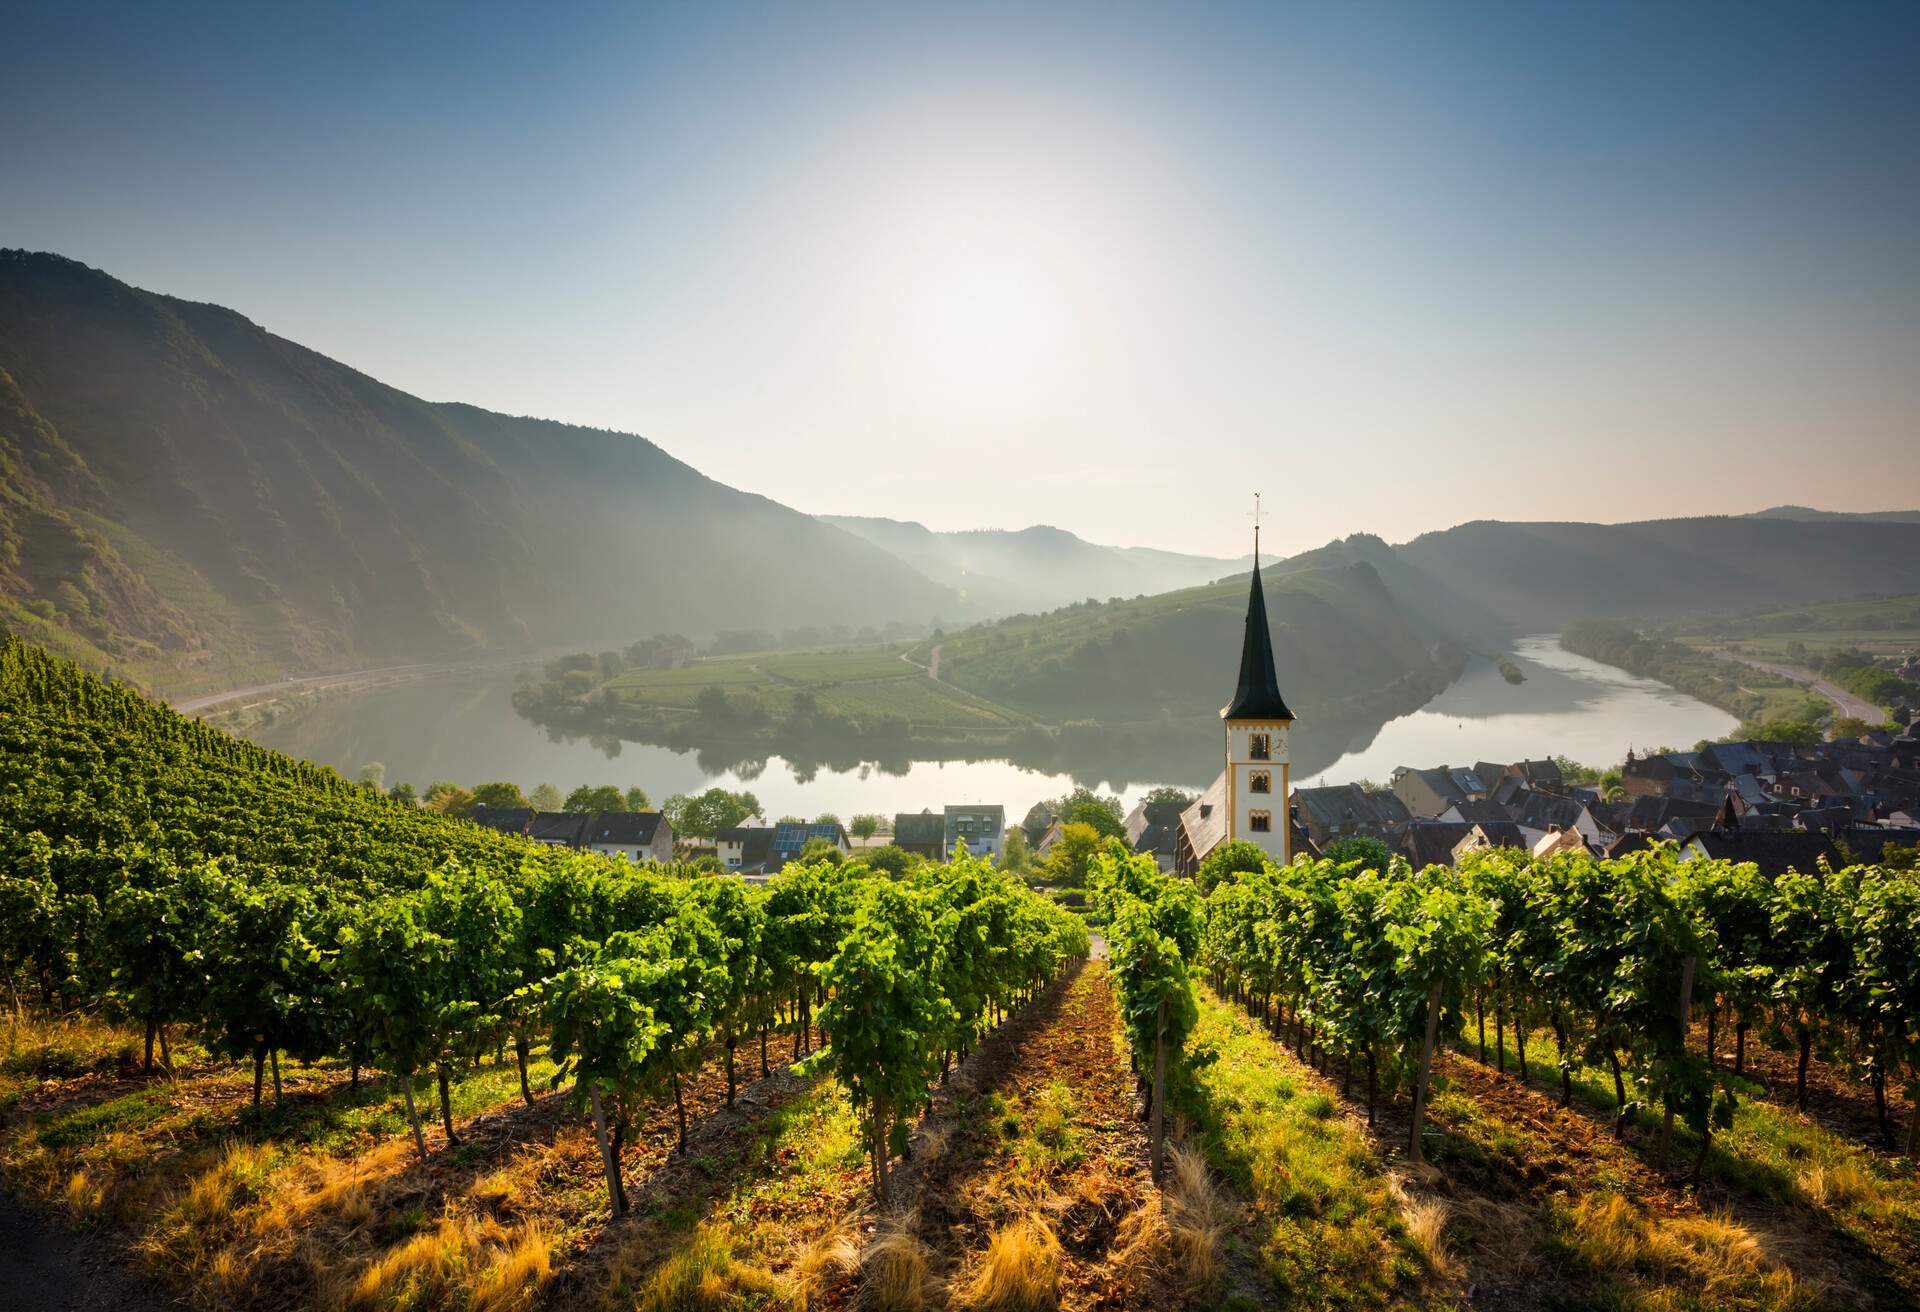 The vineyards of Bremm and the loop of the Moselle (German: Mosel) - Rhineland-Palatinate, Germany